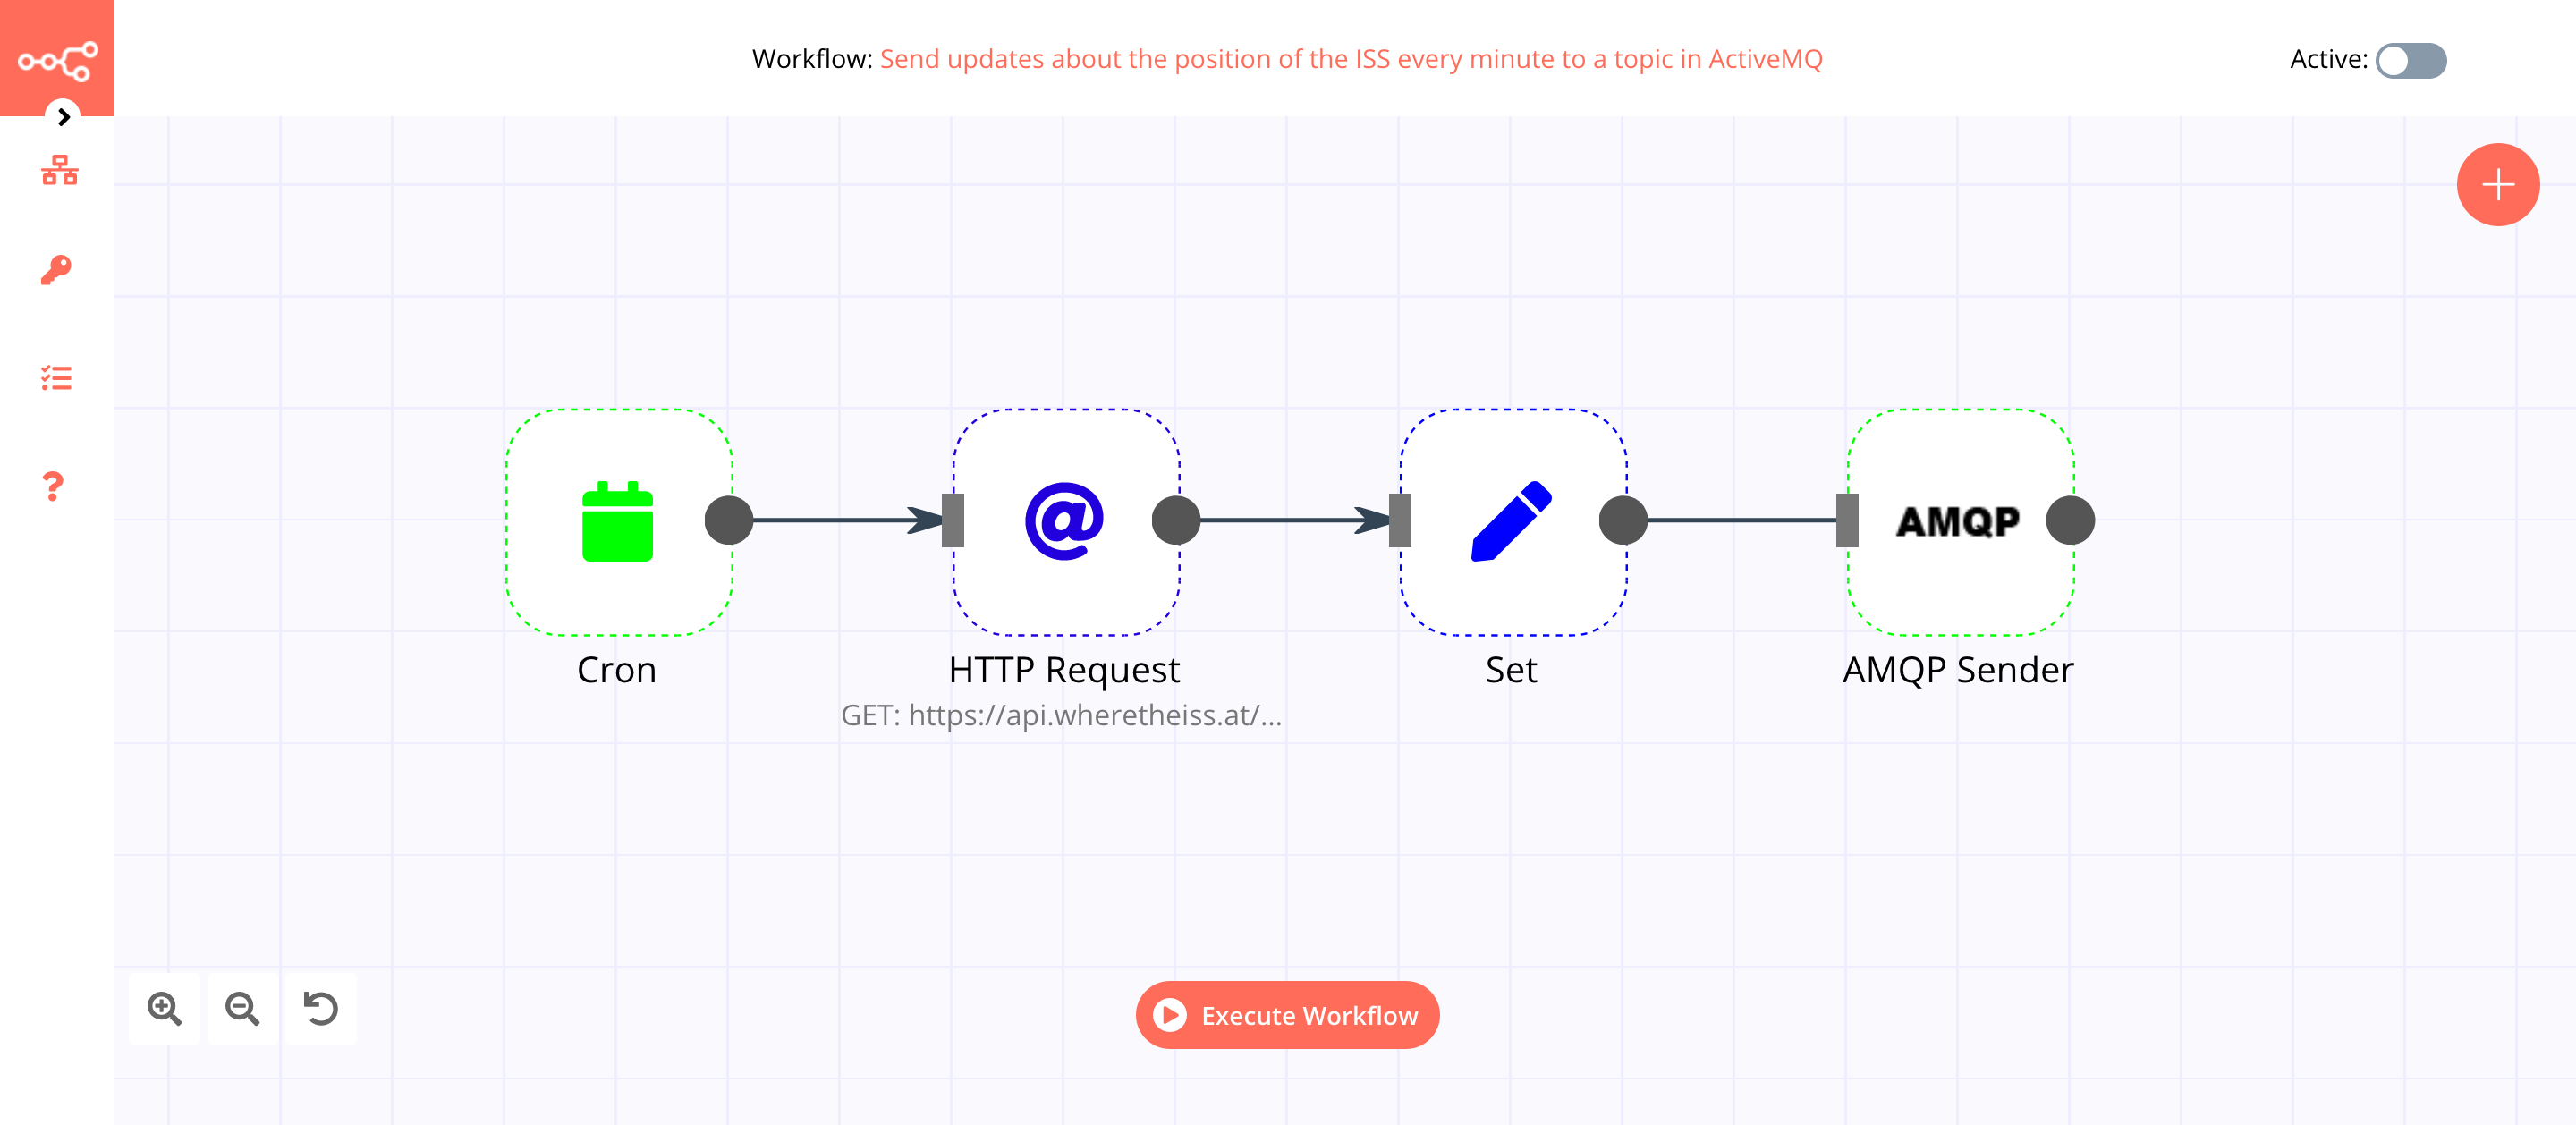 A workflow with the AMQP Sender node